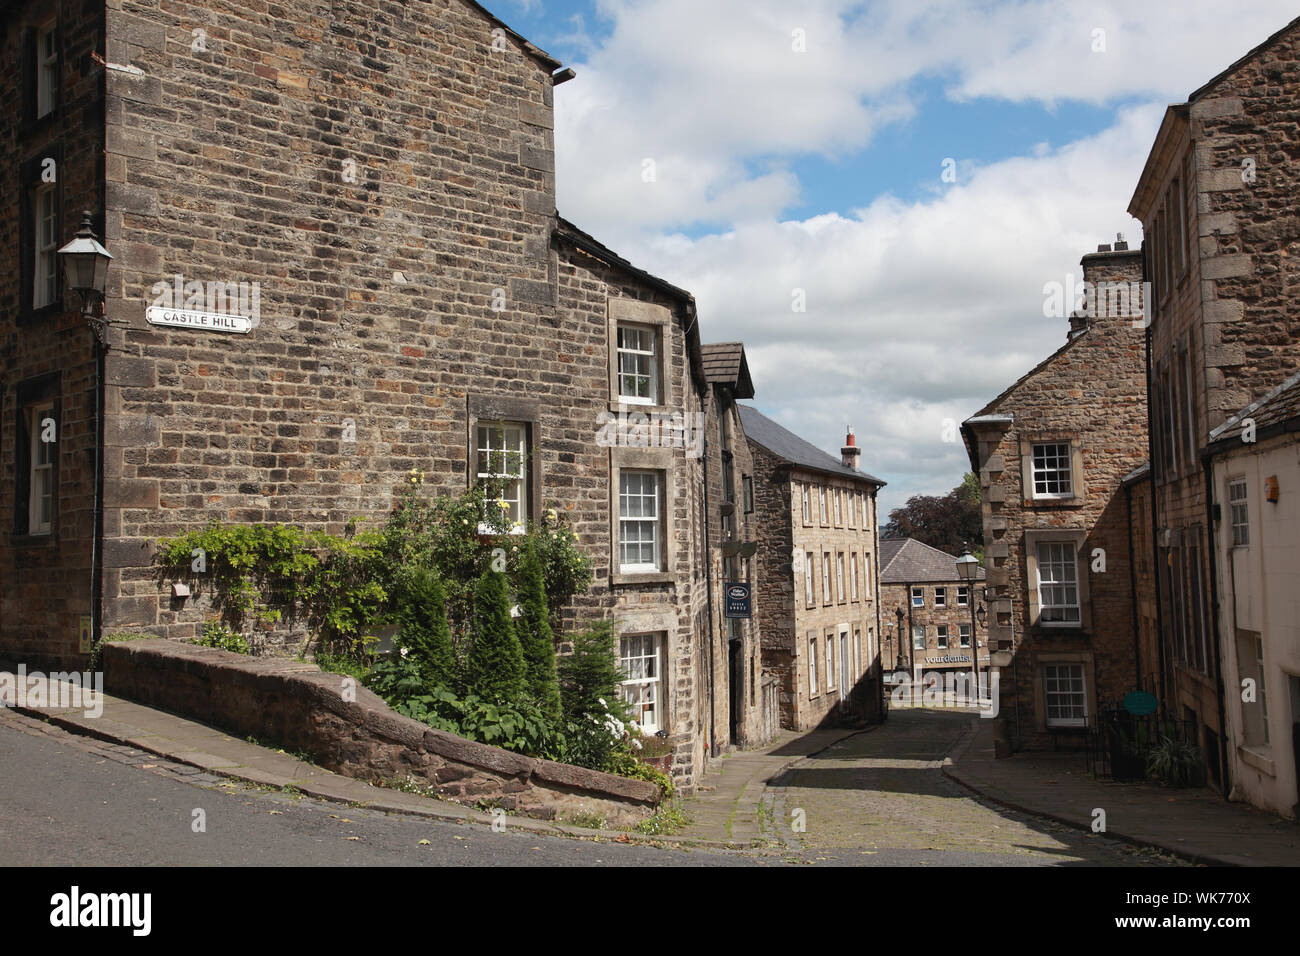 Castle Hill in Lancaster, a historic area next to the Castle, which leads to China Street, a main thoroughfare. Stock Photo